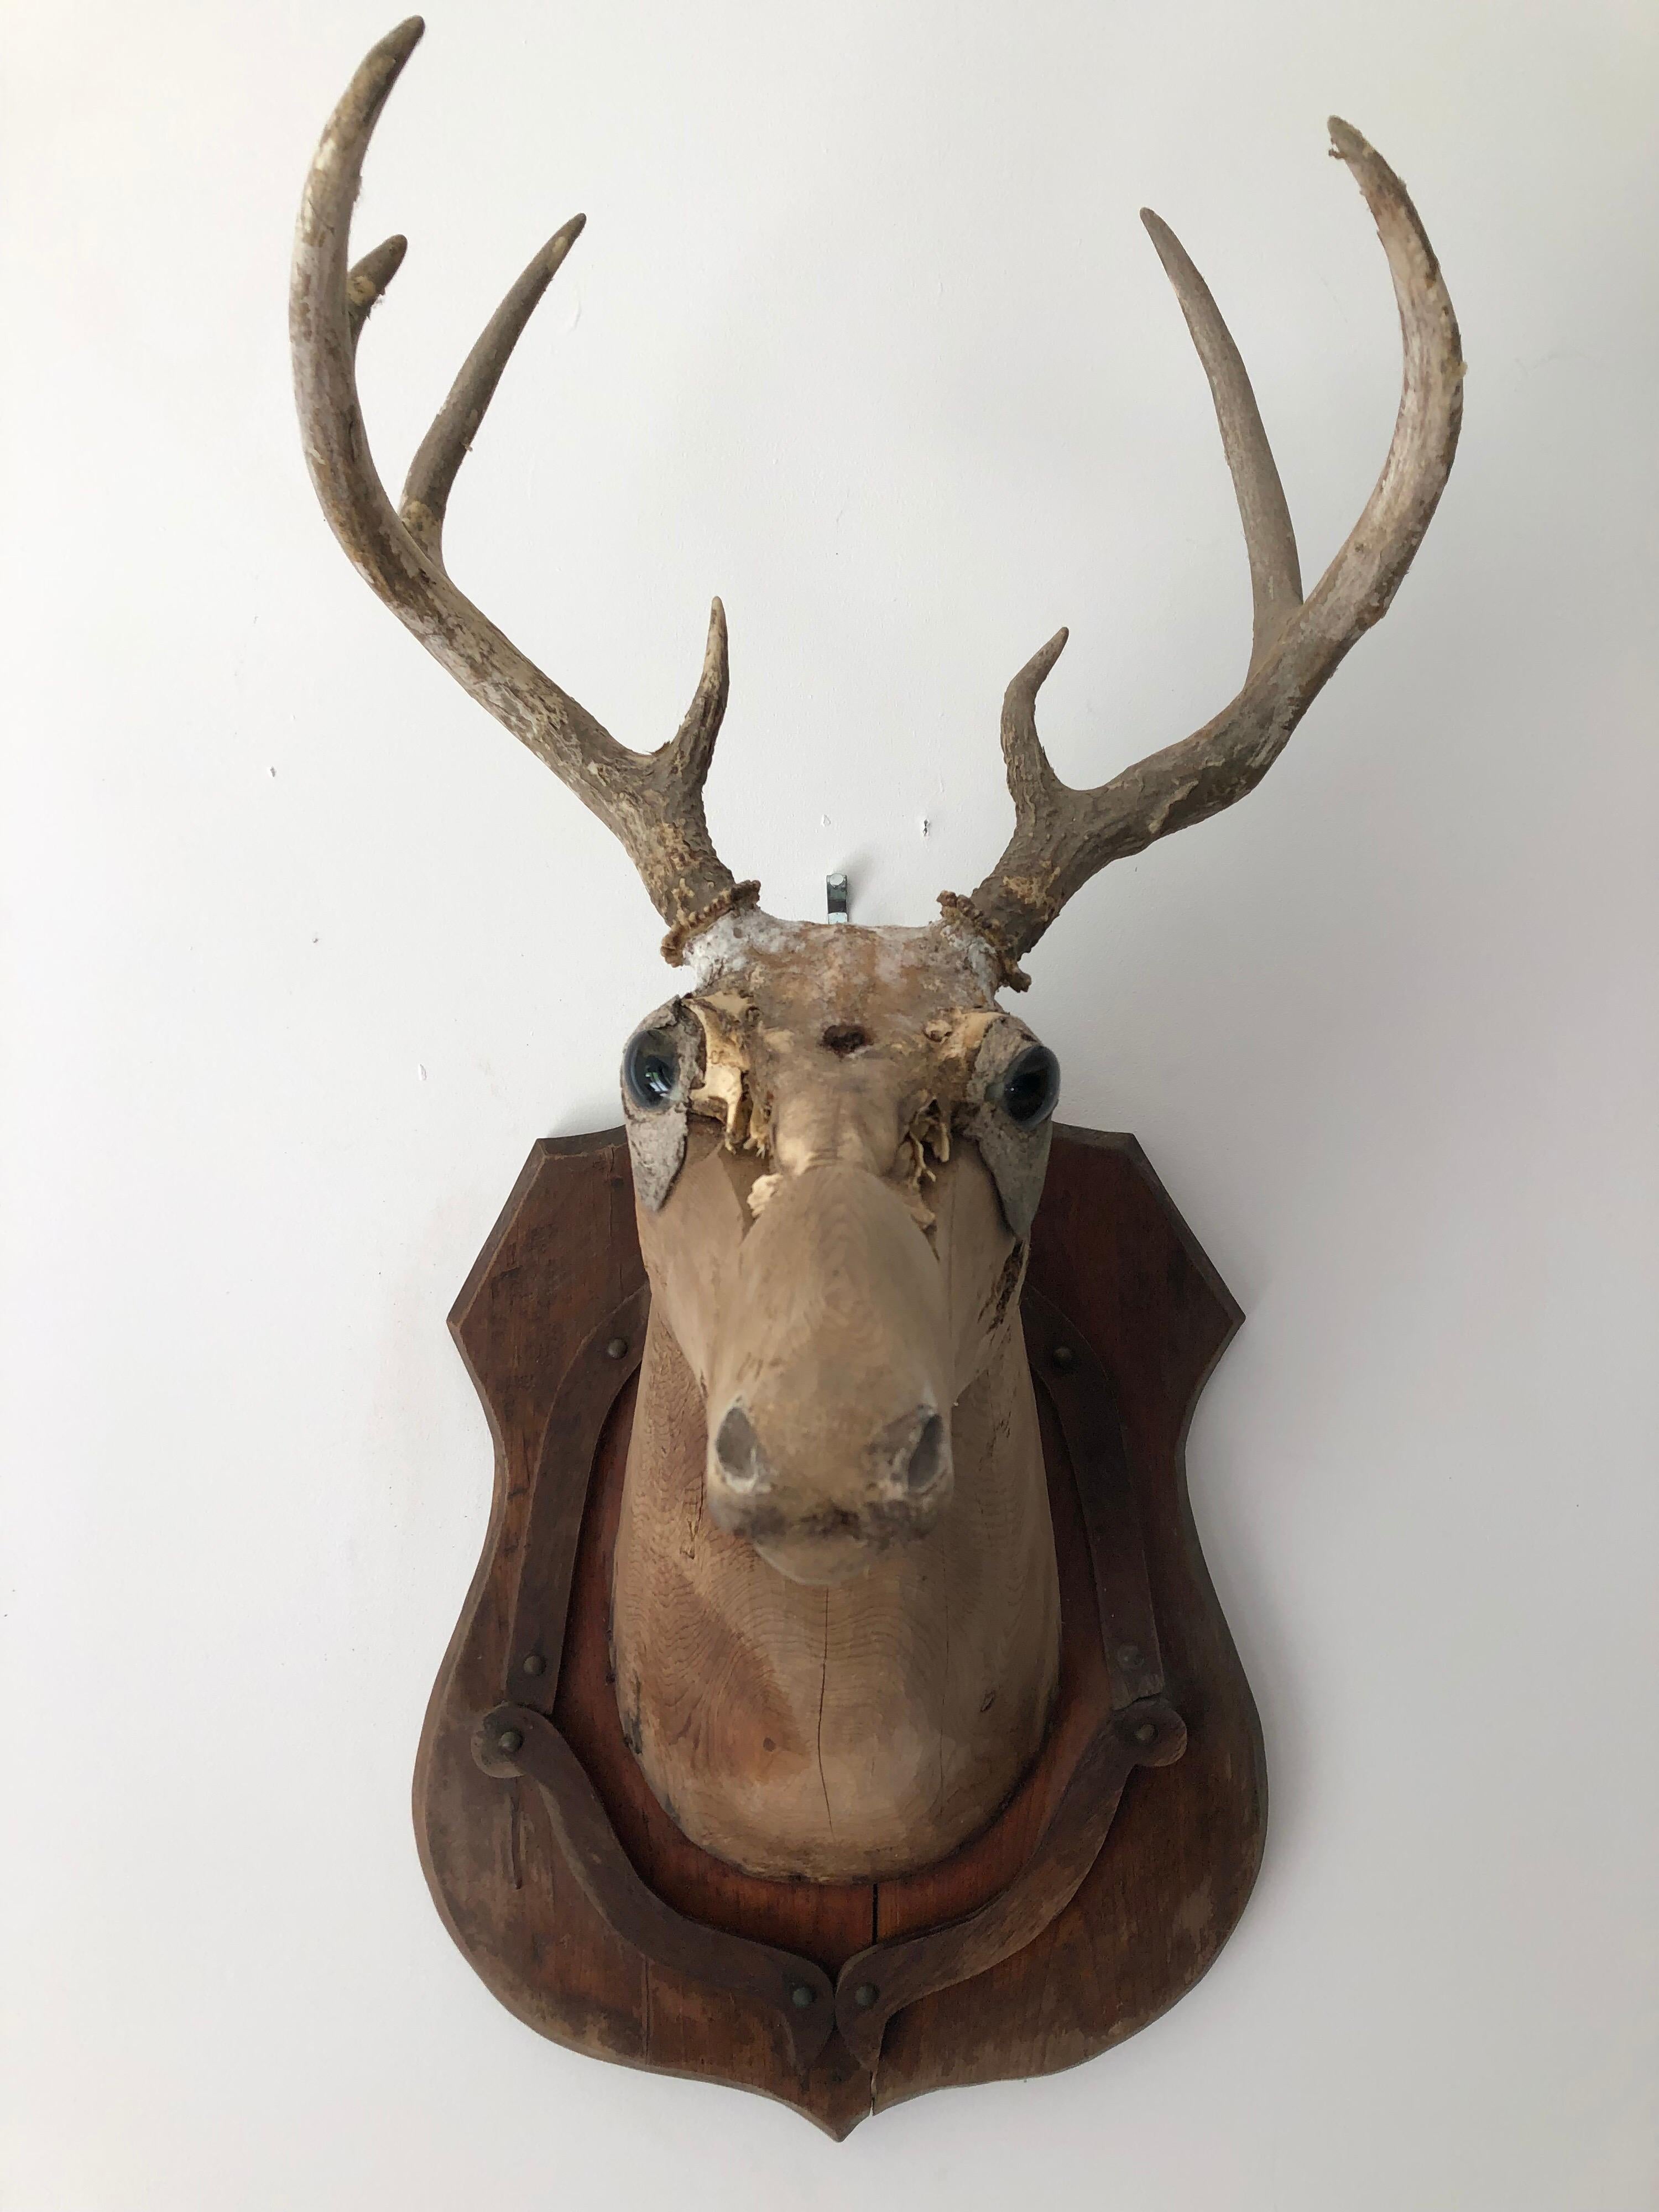 An early 20th century taxidermy mold of a dear with natural horns.